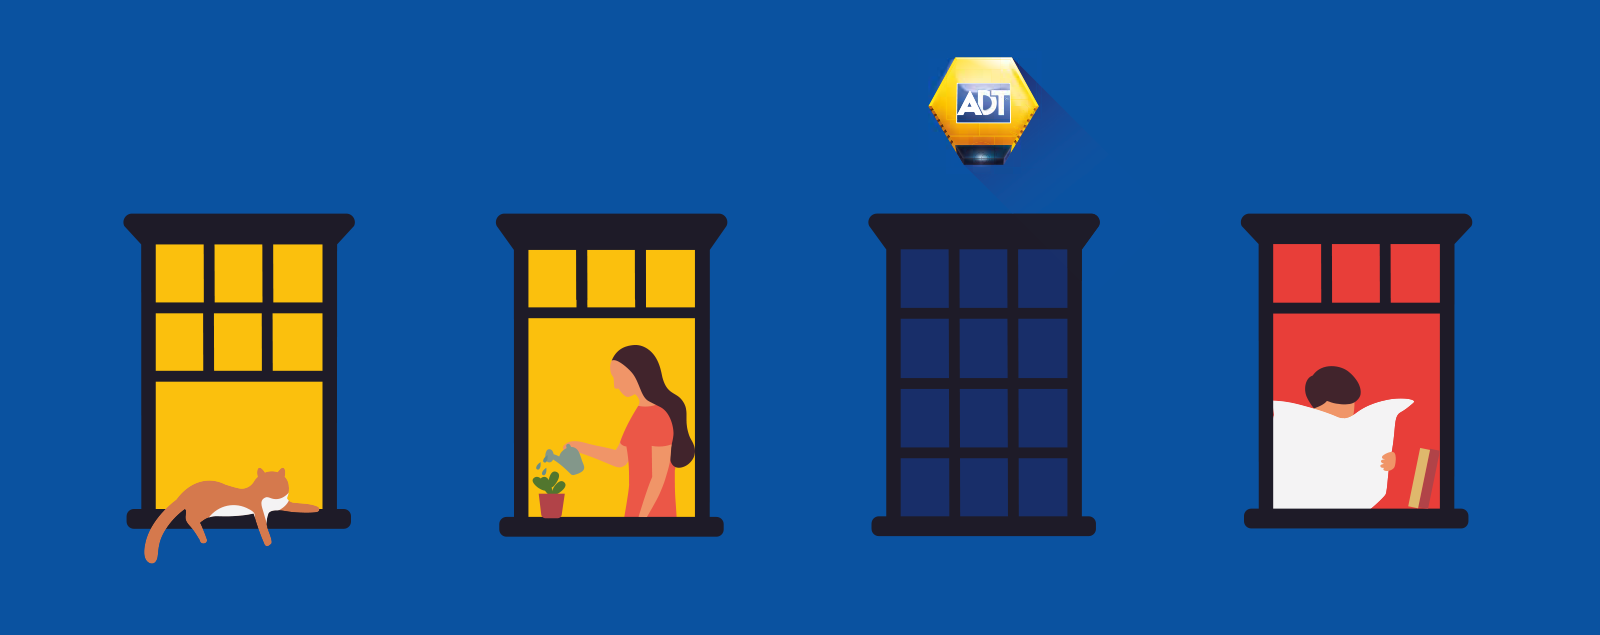 Graphic of windows with ADT alarm on wall